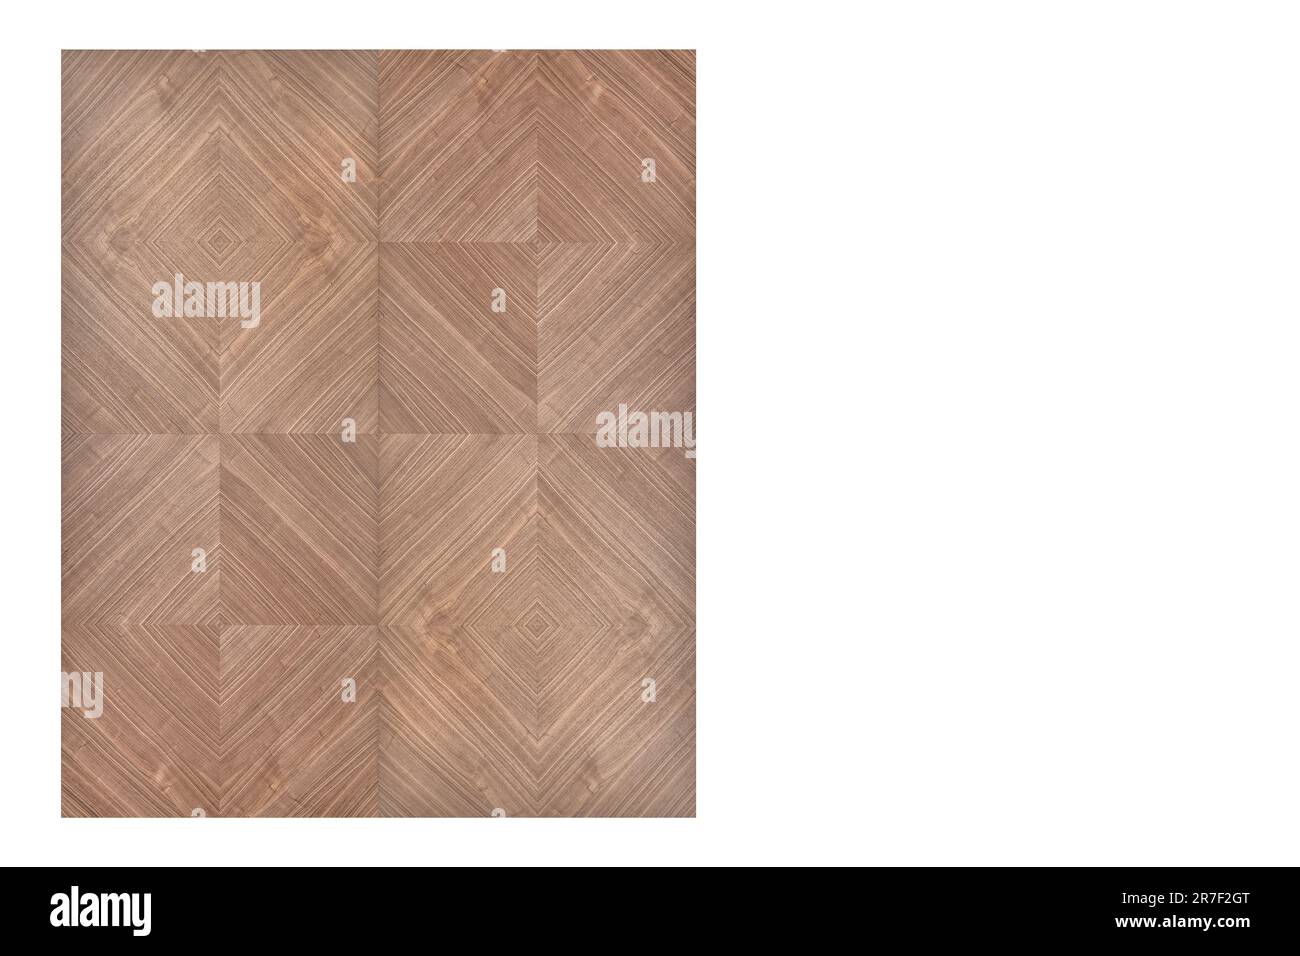 Wall panel of walnut veneer with geometric rhombic pattern isolated on white background Stock Photo